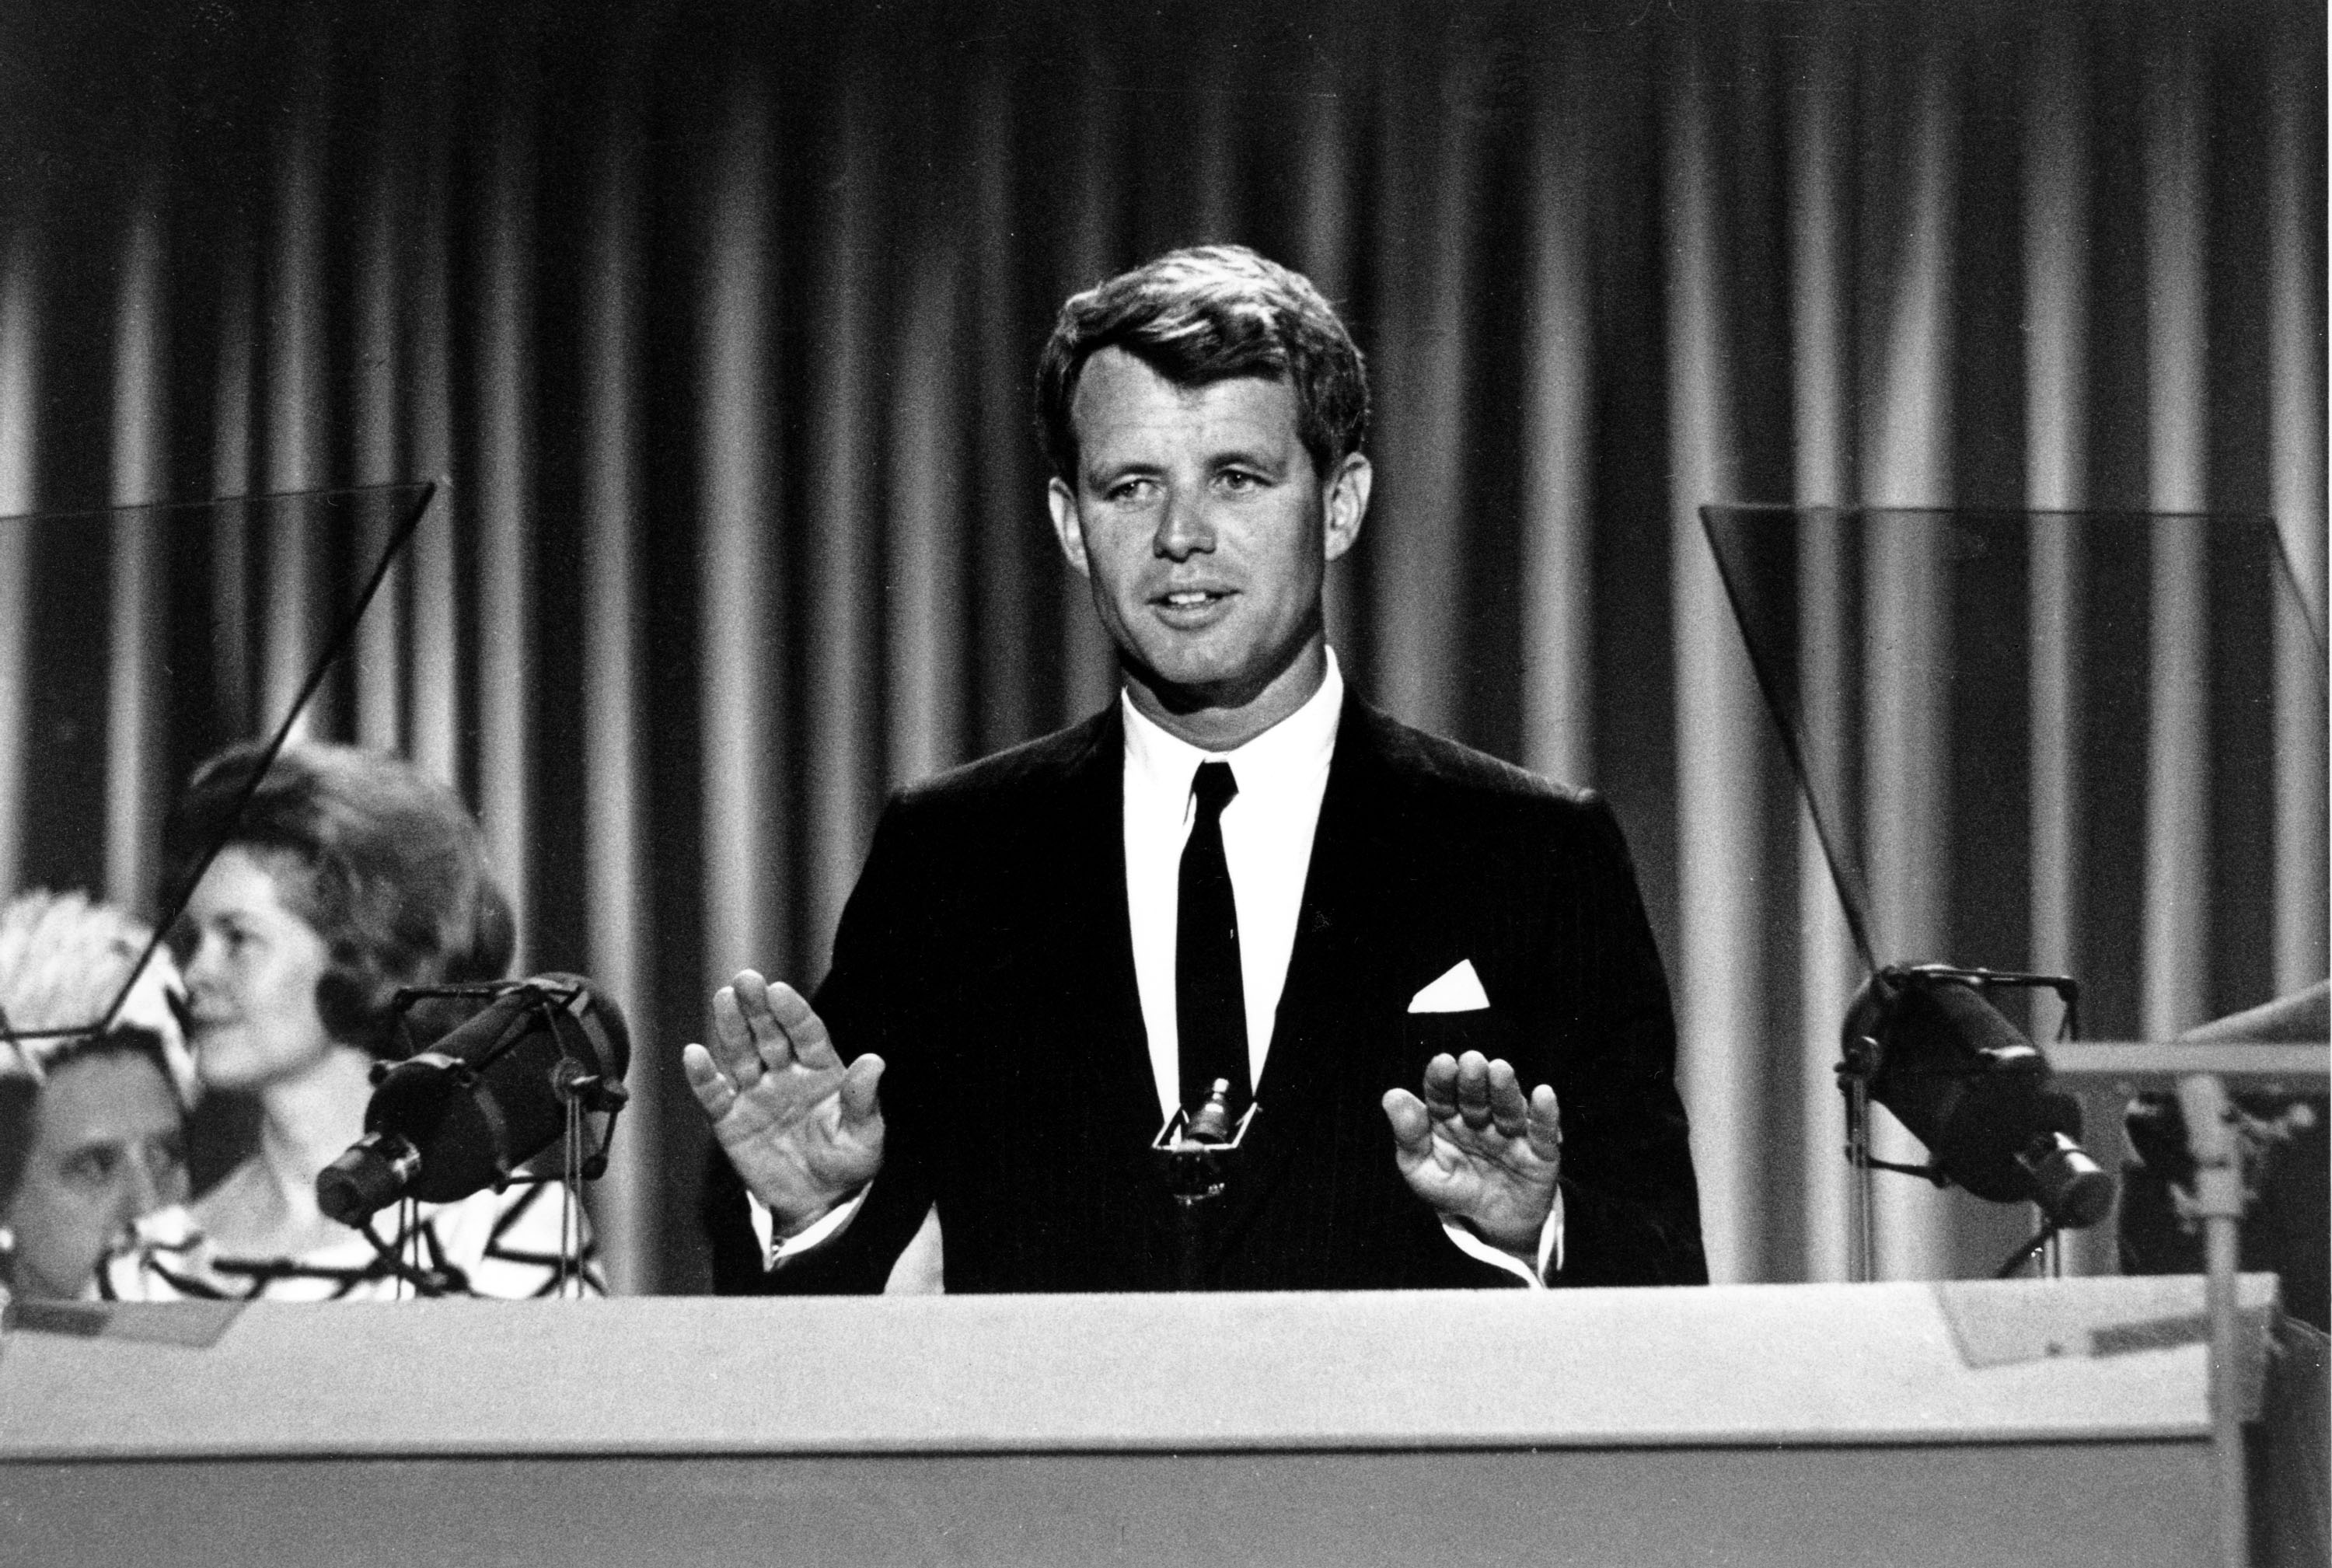 FILE - In this Aug. 28, 1964, file photo, Sen. Robert Kennedy stands before the delegates at the Democratic National Convention in Atlantic City, N.J. Democrats have little hope of matching the fervor and historical import of their 2008 convention, when they made Barack Obama the first black presidential nominee of a major political party. One of the memorable moments from past conventions was delegates standing in tearful silence as Robert Kennedy quotes Shakespeare in tribute to his slain brother, President John F. Kennedy: "When he shall die, take him and cut him out into stars, and he shall make the face of heaven so fine that all the world will be in love with night and pay no worship to the garish sun." (AP Photo)